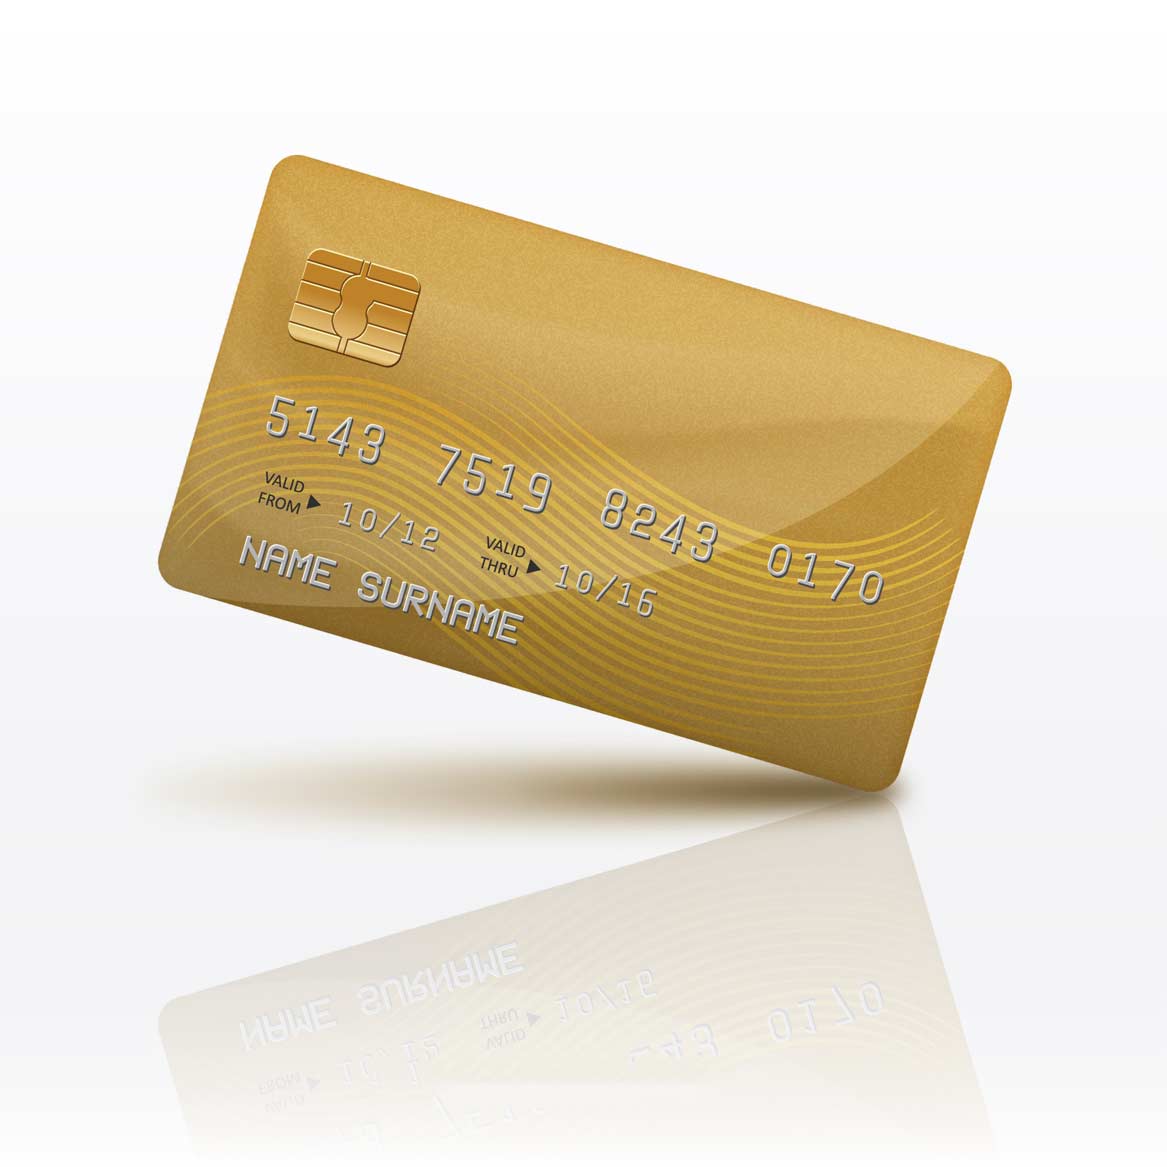 Credit Card Photoshop Template from images.freecreatives.com